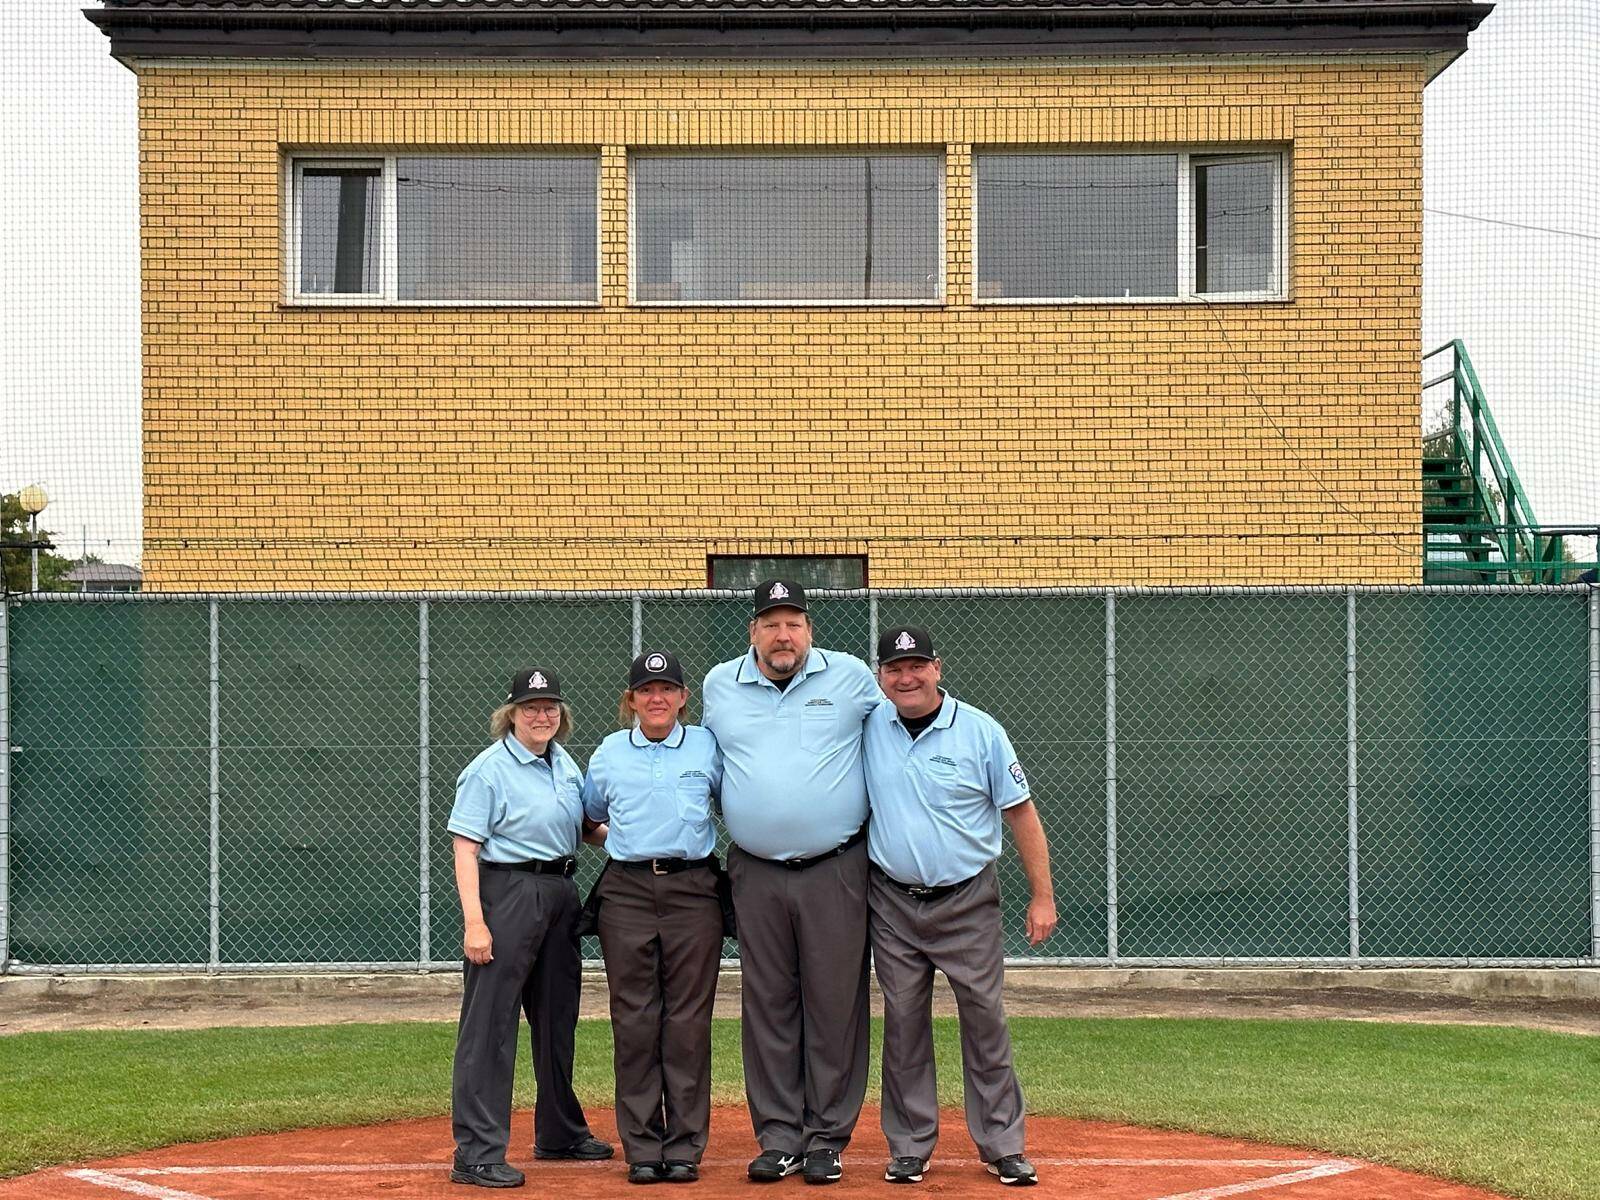 Rita Cline, left, stands with umpires from Italy, Chicago and France who officiated games in Kutno, Poland during the regional tournament of the Little League World Series in July. She has been an umpire for the North Whidbey Little League for the past 26 years. (Photo courtesy of Rita Cline)